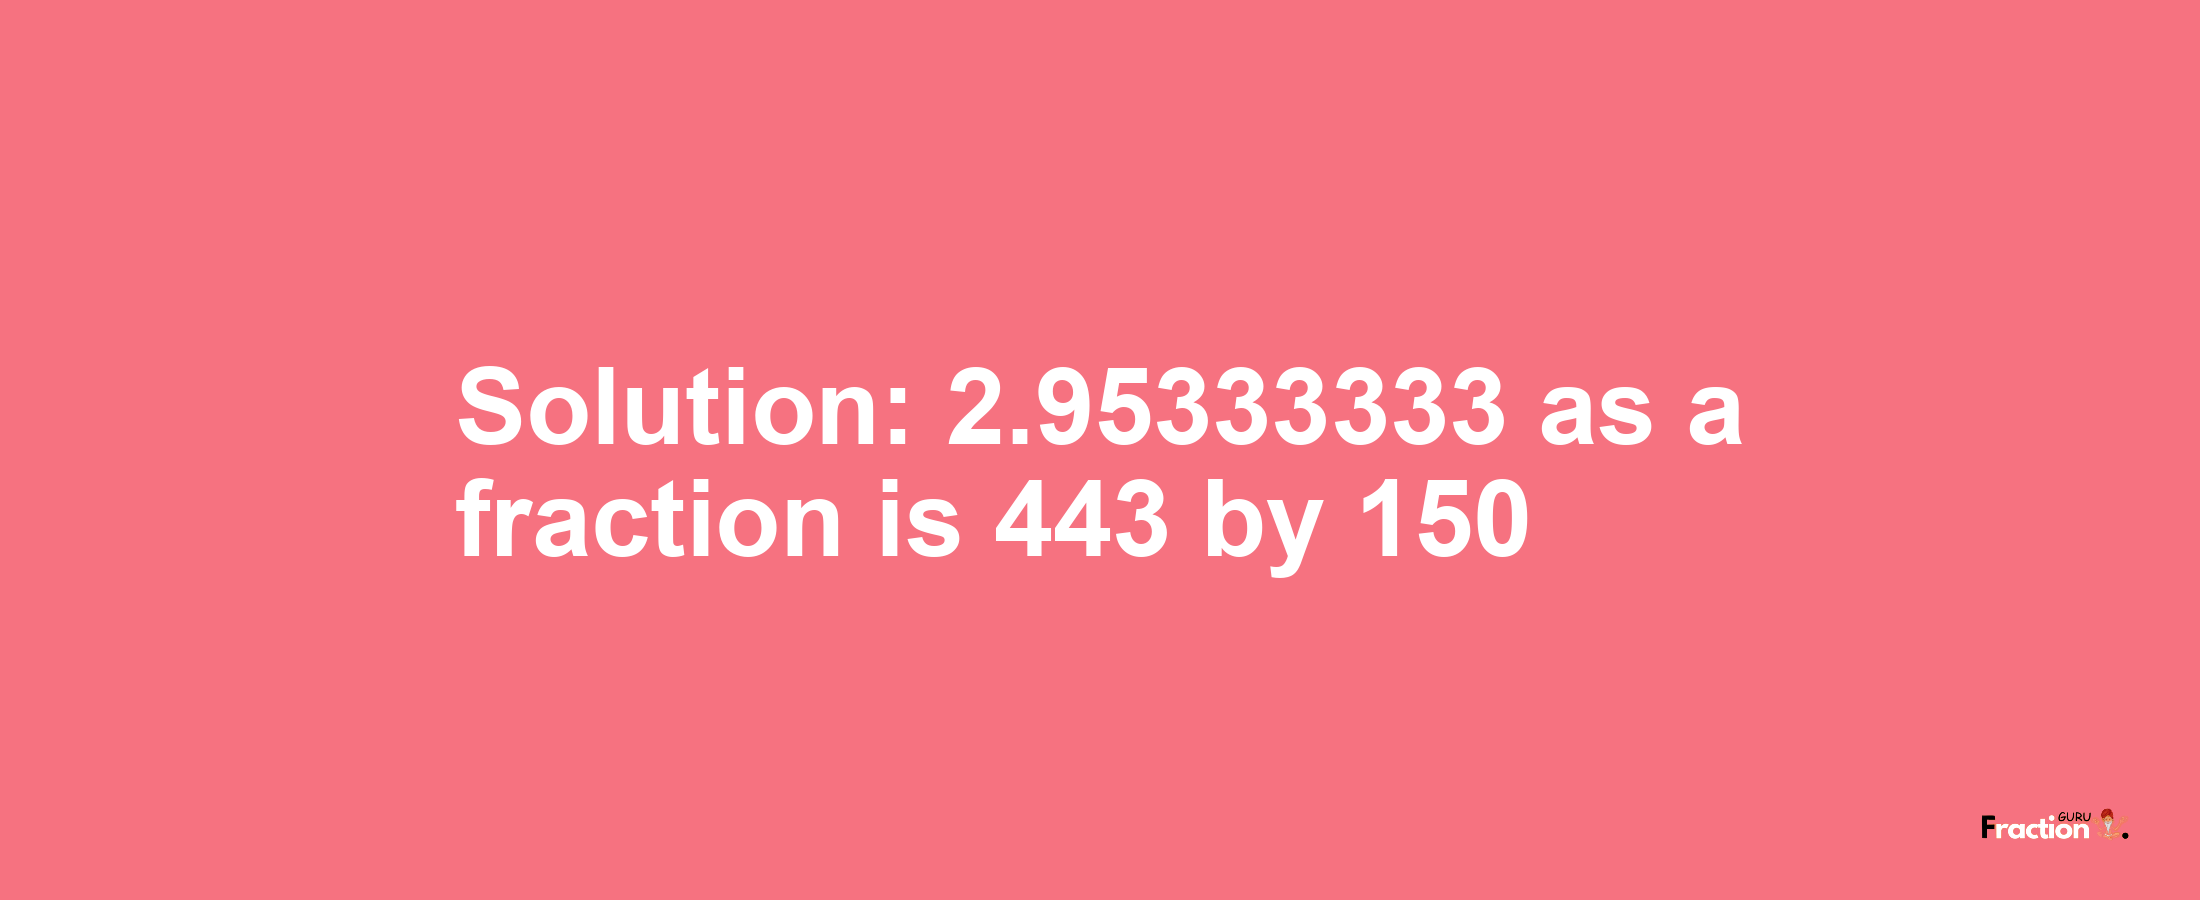 Solution:2.95333333 as a fraction is 443/150